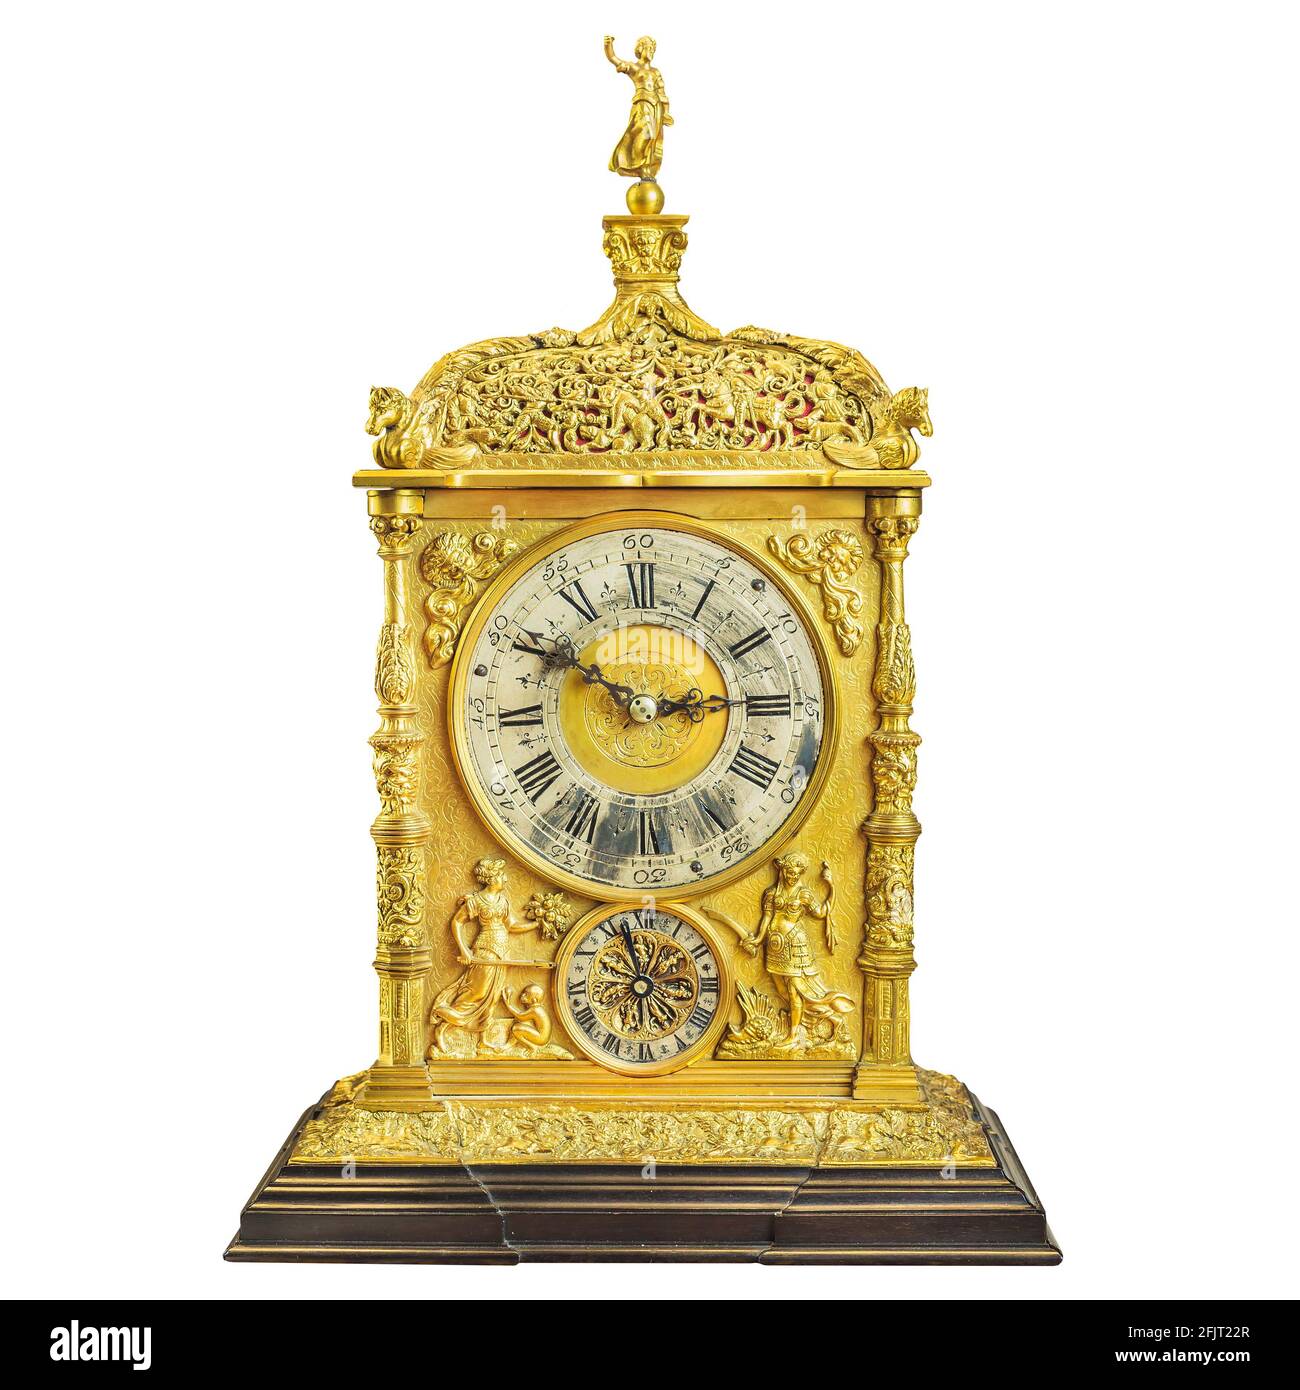 Antique eighteenth century golden table clock with marble foot isolated on a white background Stock Photo